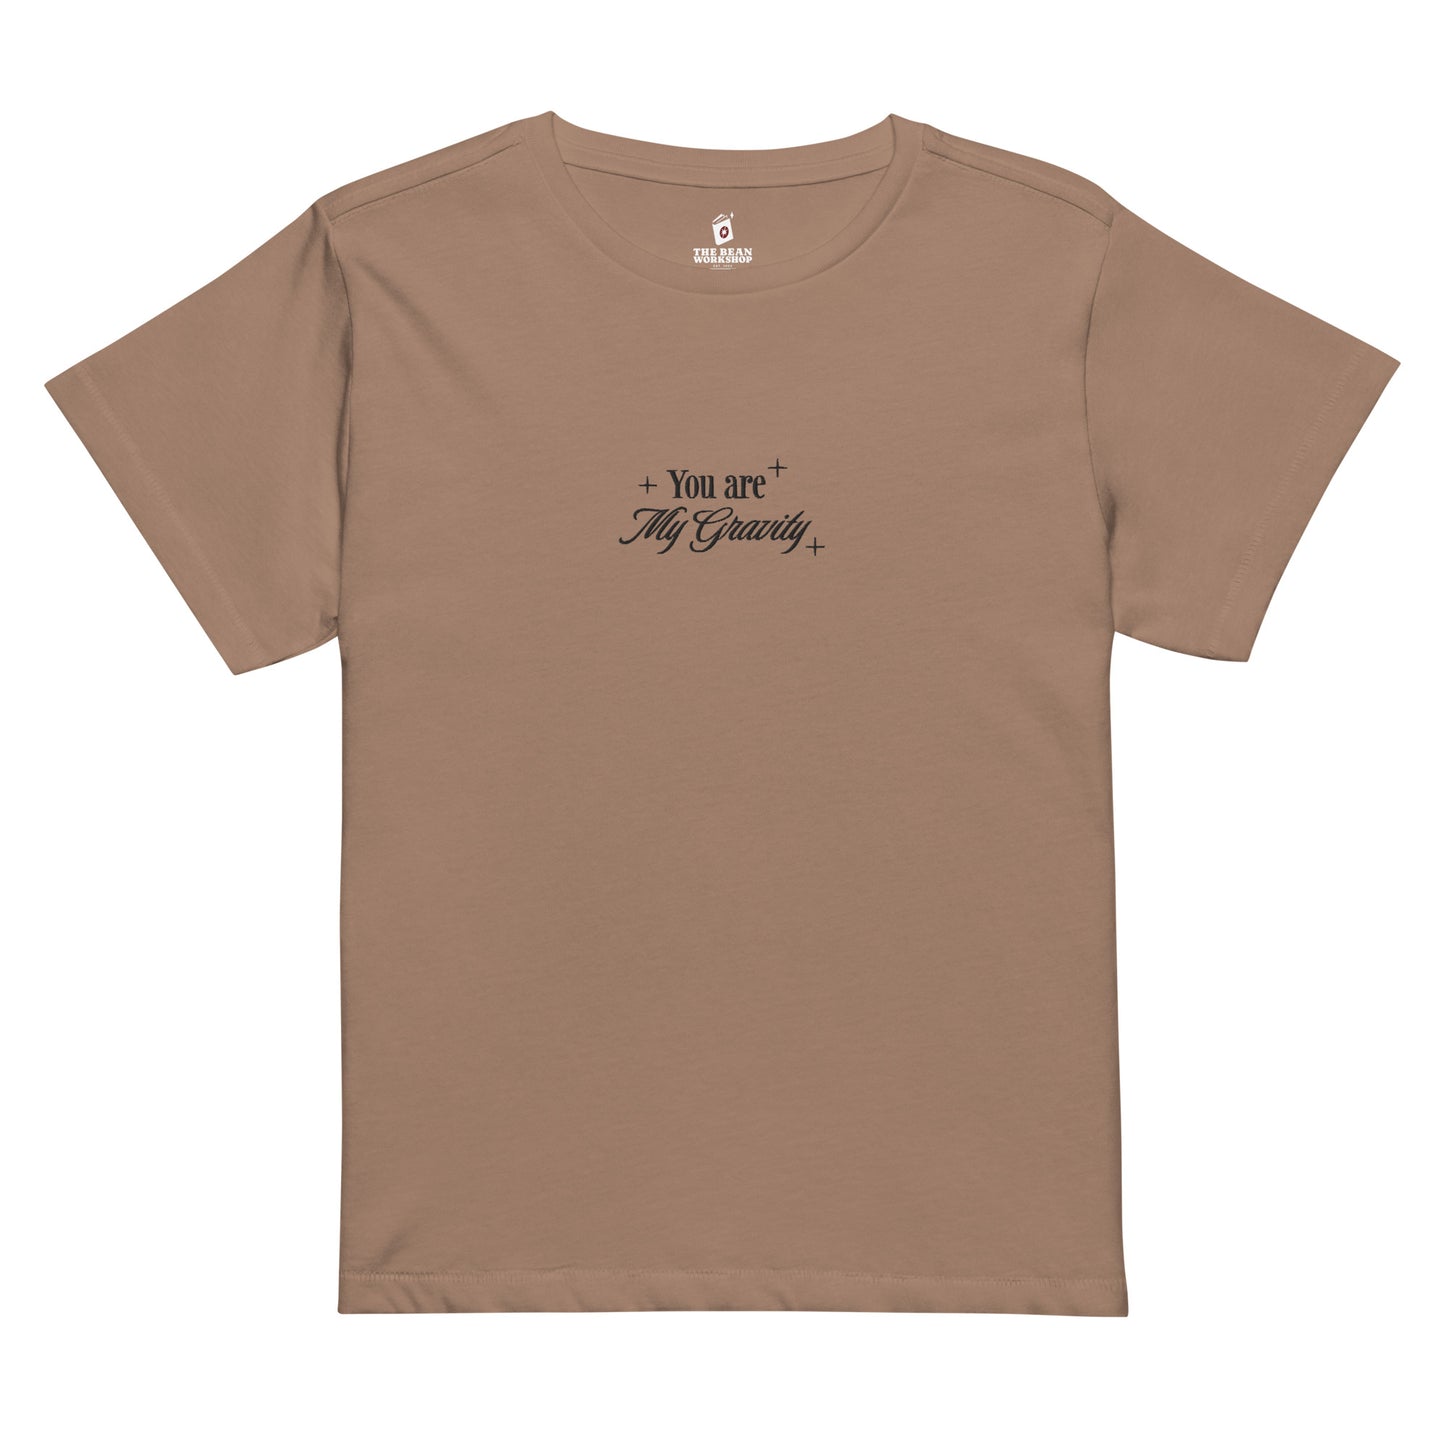 You Are My Gravity Embroidered Tee Shirt